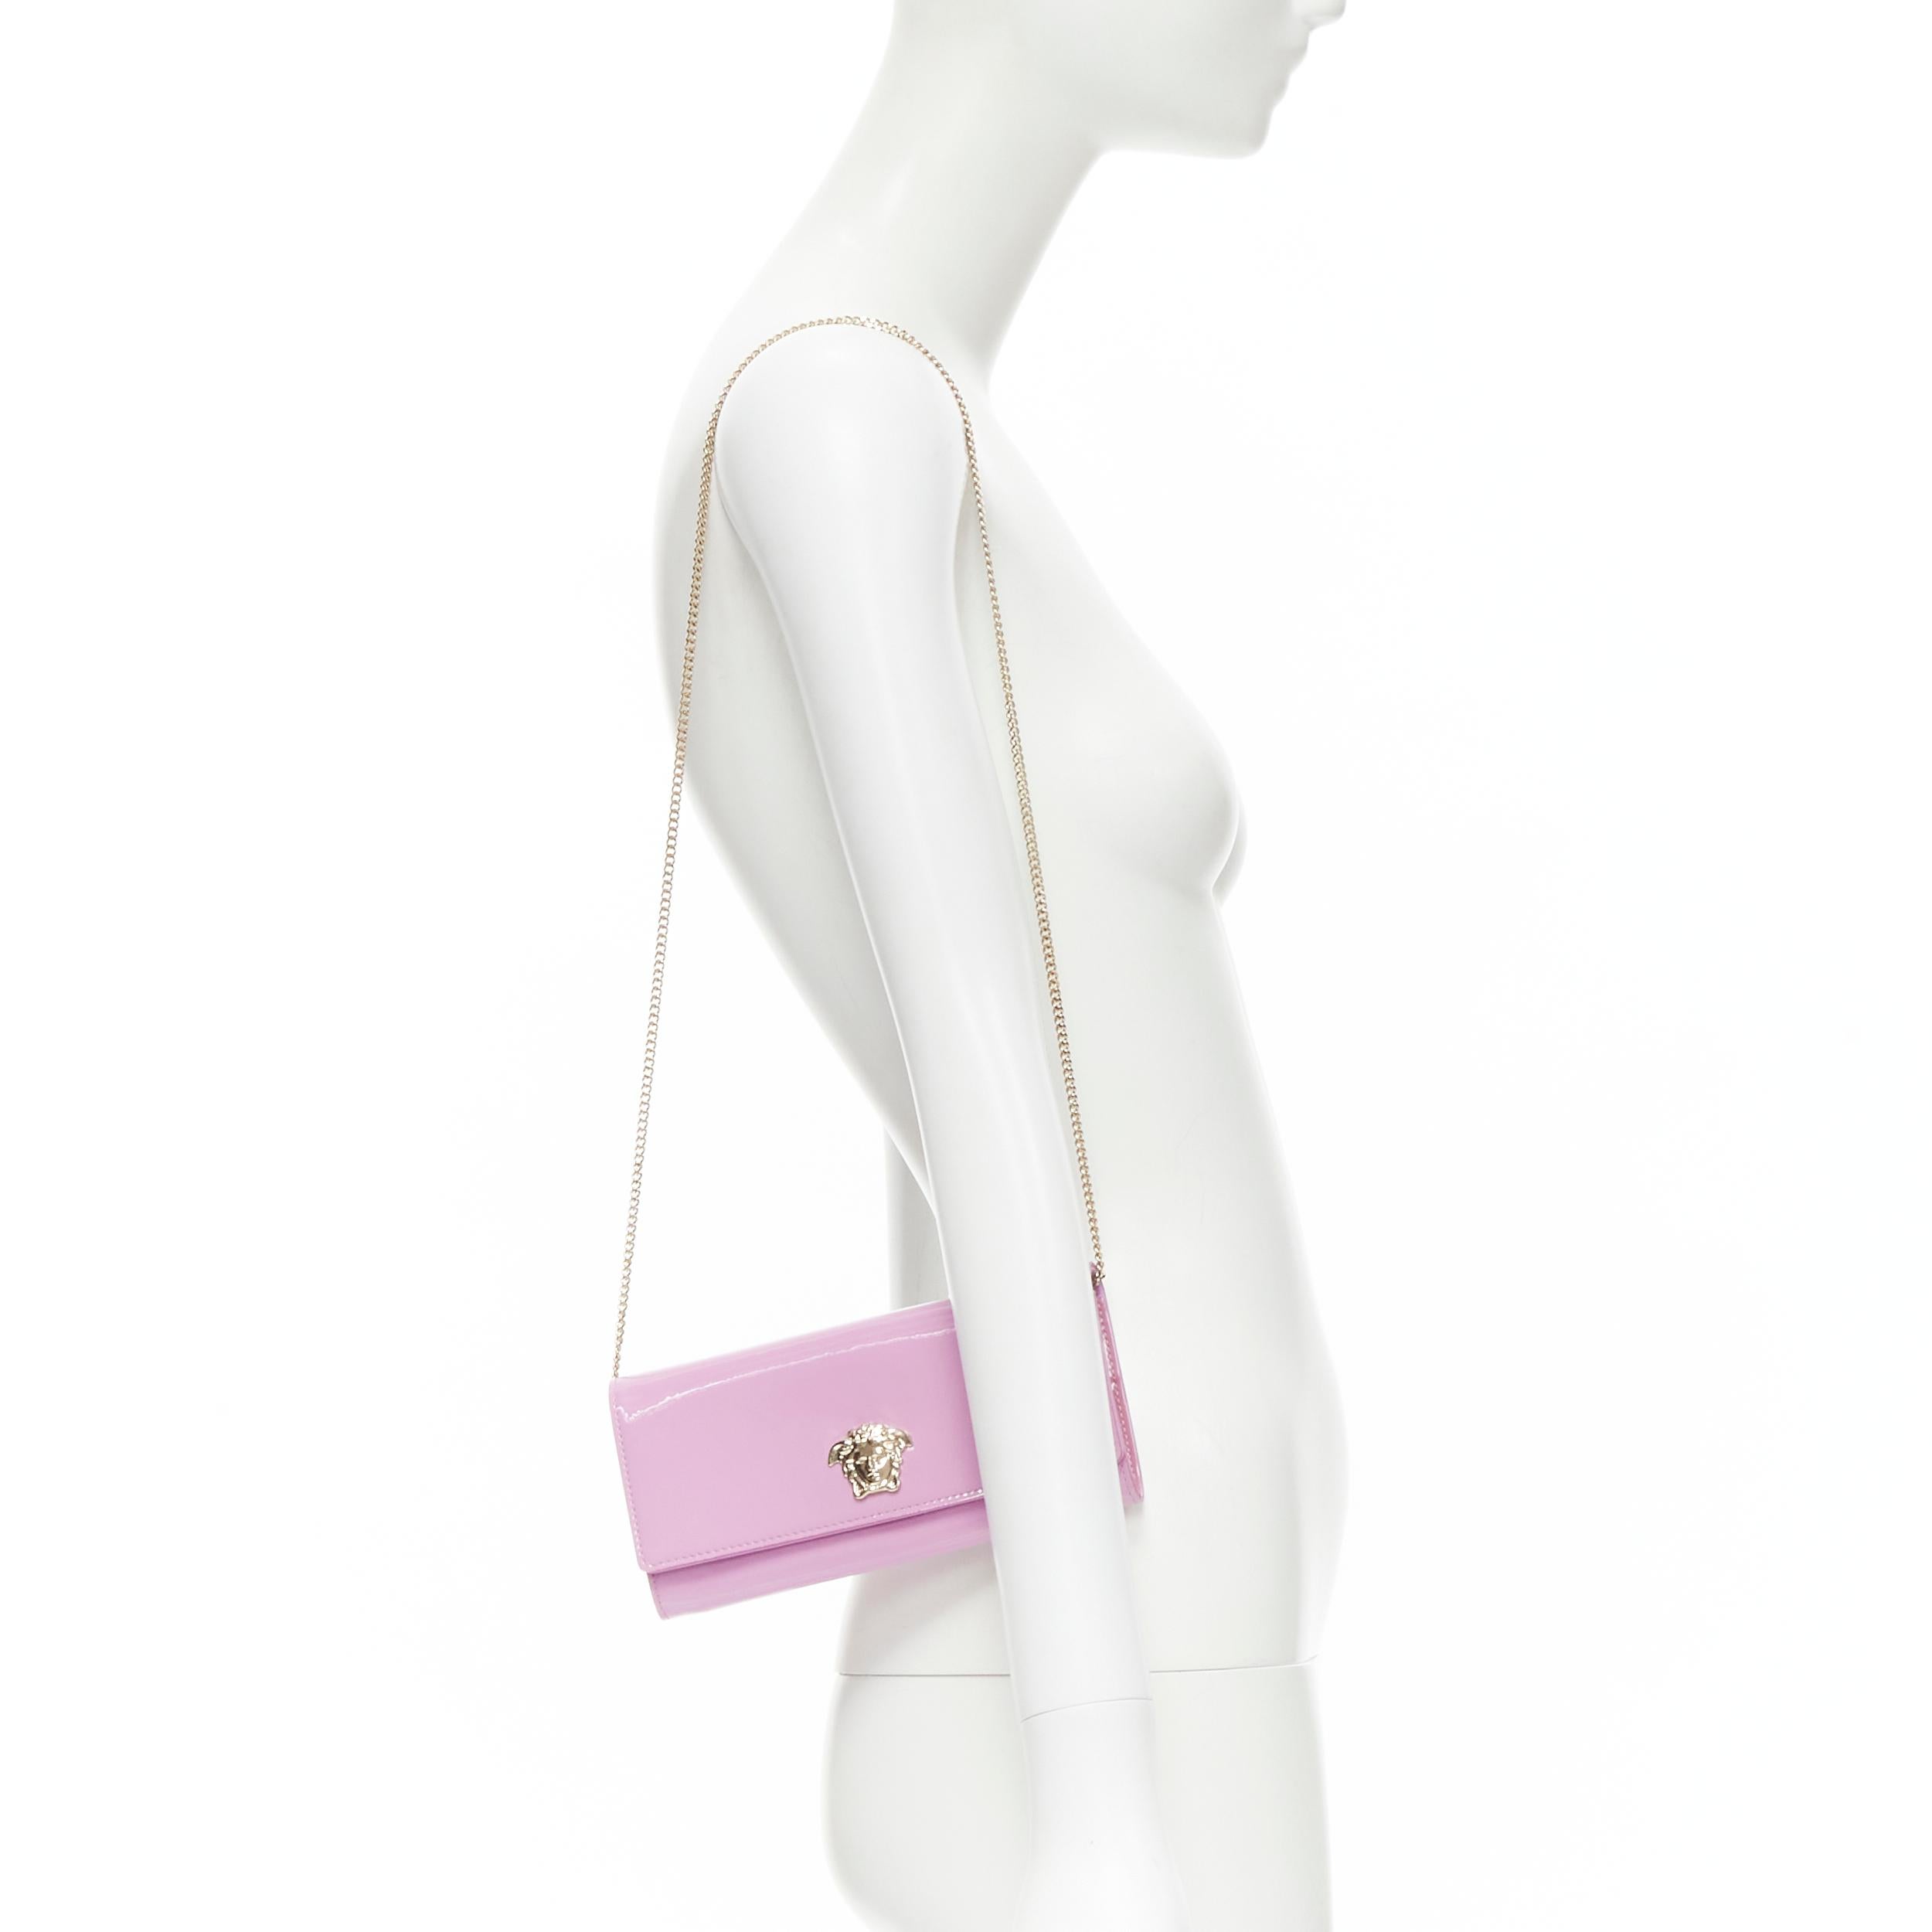 new VERSACE Palazzo Medusa lilac purple patent gold wallet chain crossbody bag 
Reference: TGAS/B01959 
Brand: Versace 
Collection: Palazzo Medusa 
Material: Patent Leather 
Color: Purple 
Pattern: Solid 
Closure: Button 
Extra Detail: Gold-tone